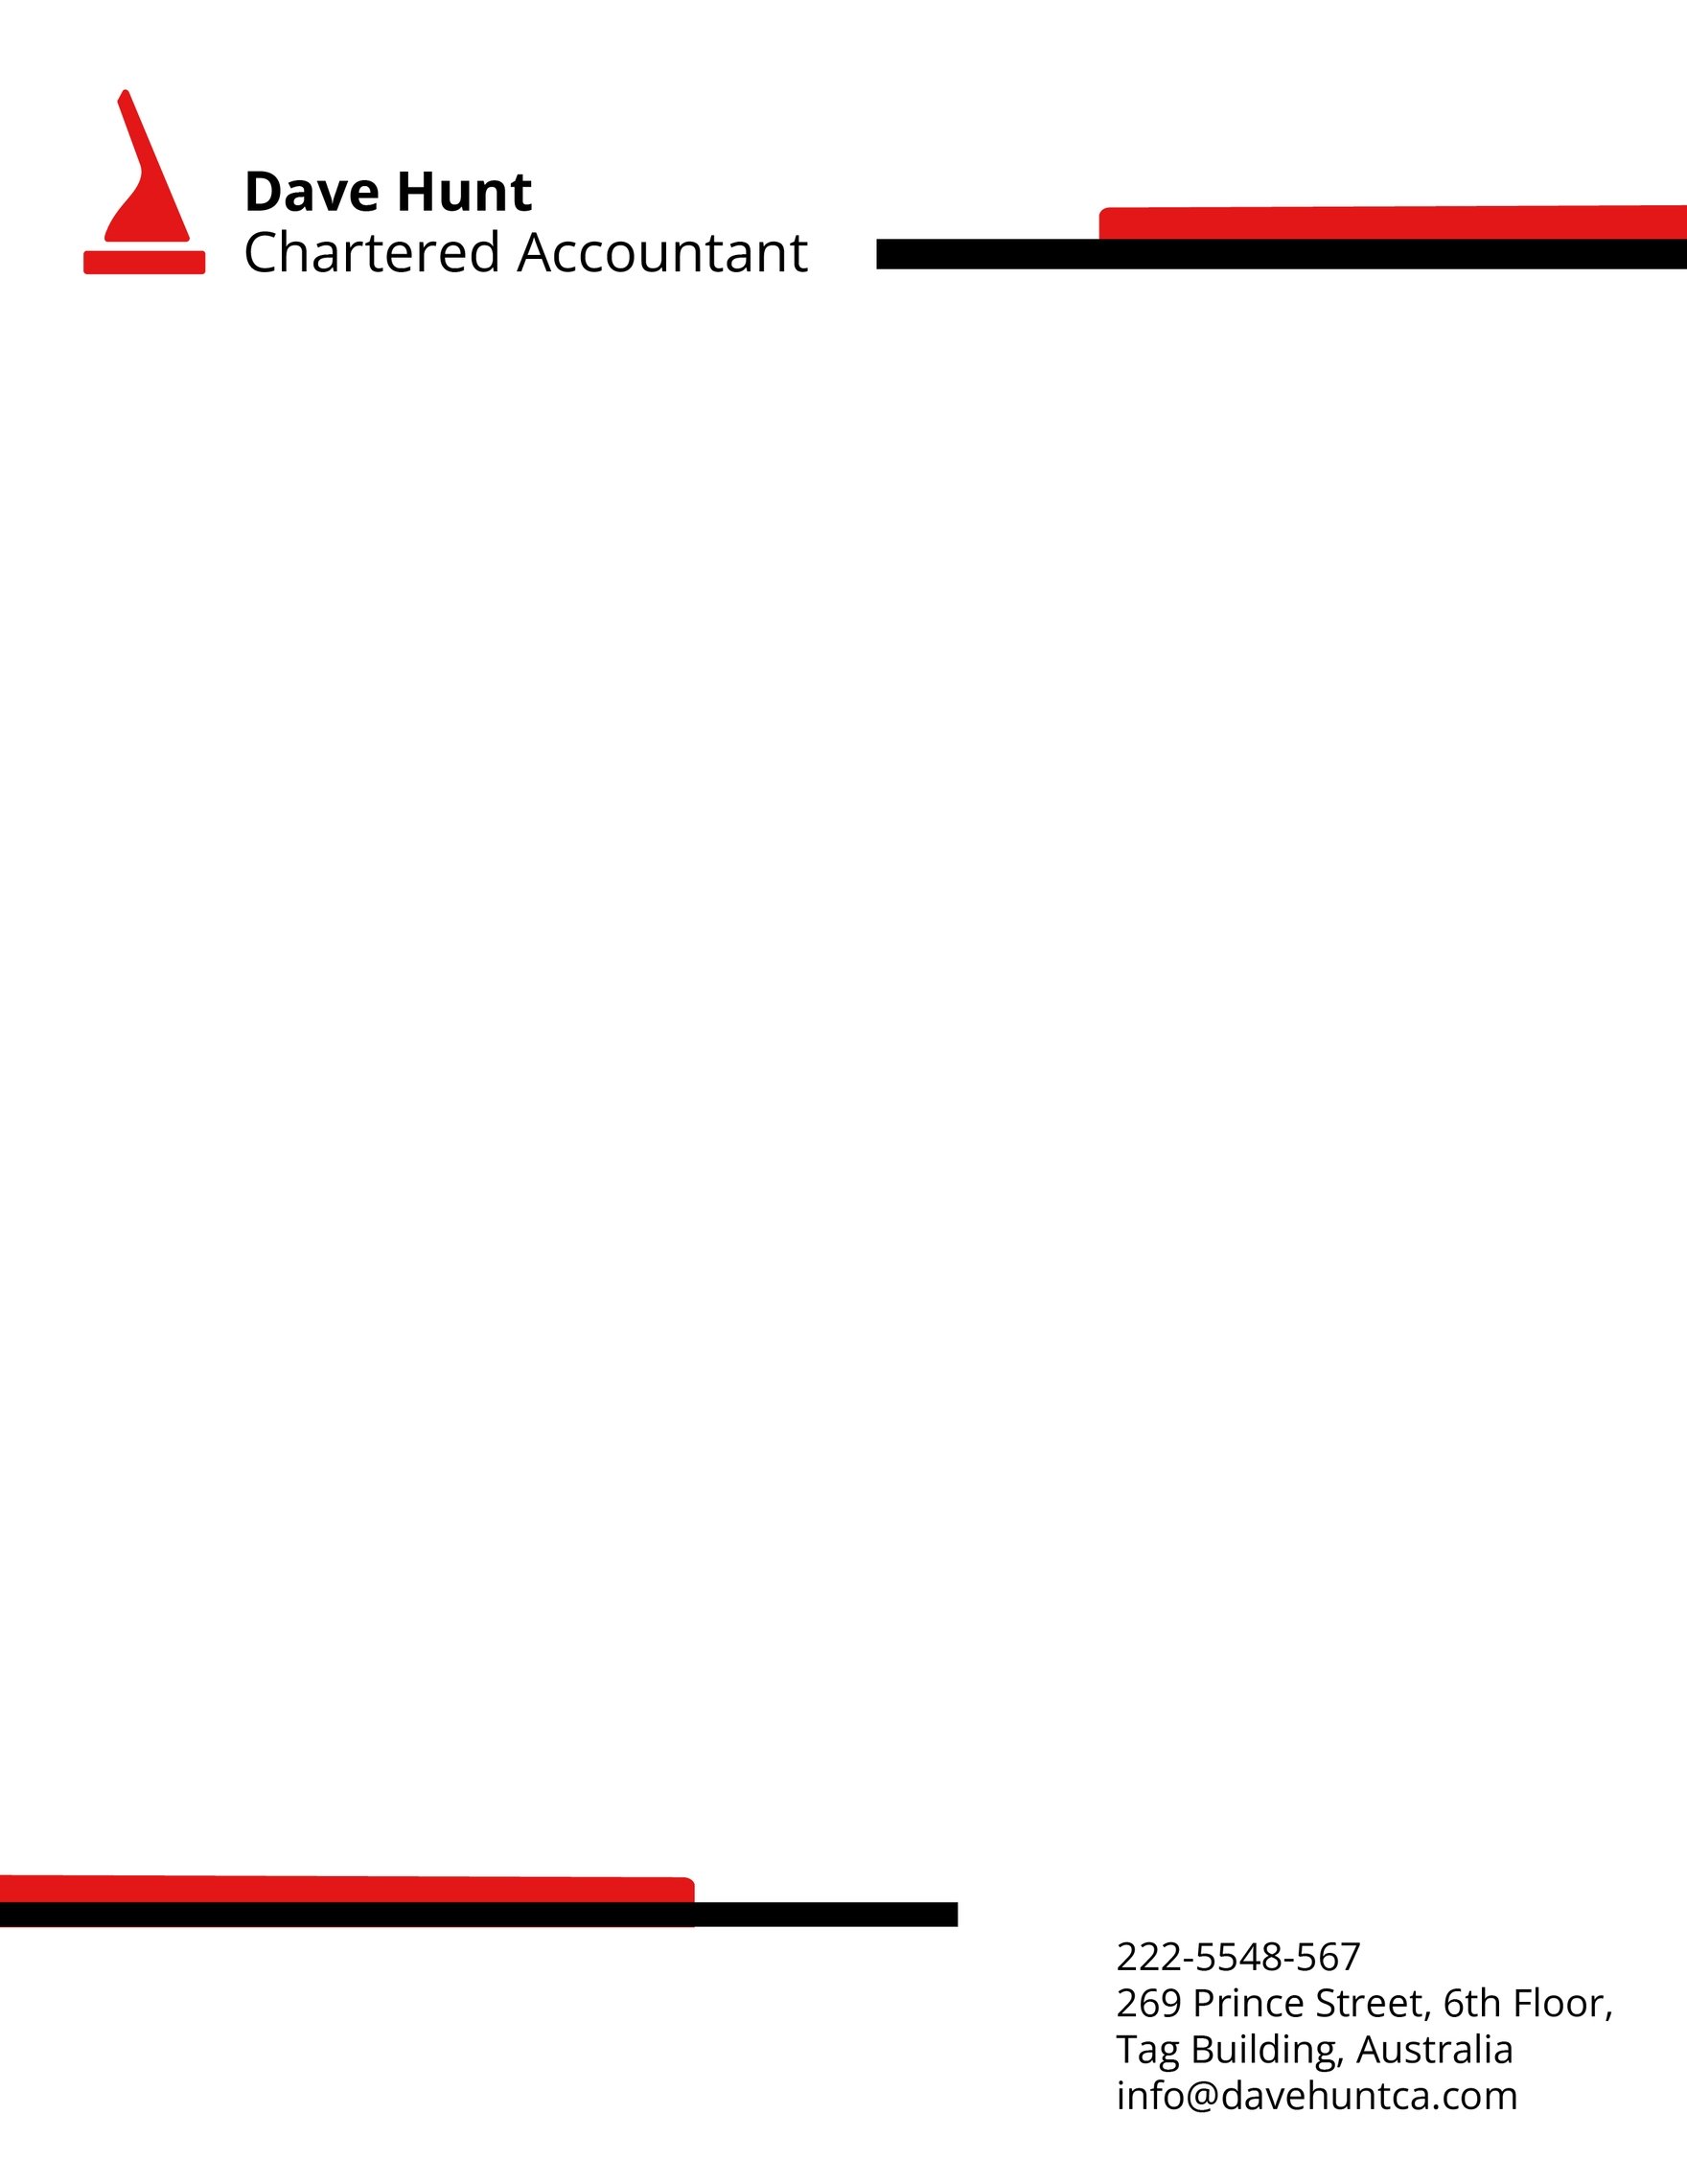 Official Chartered Accountant Letterhead Template